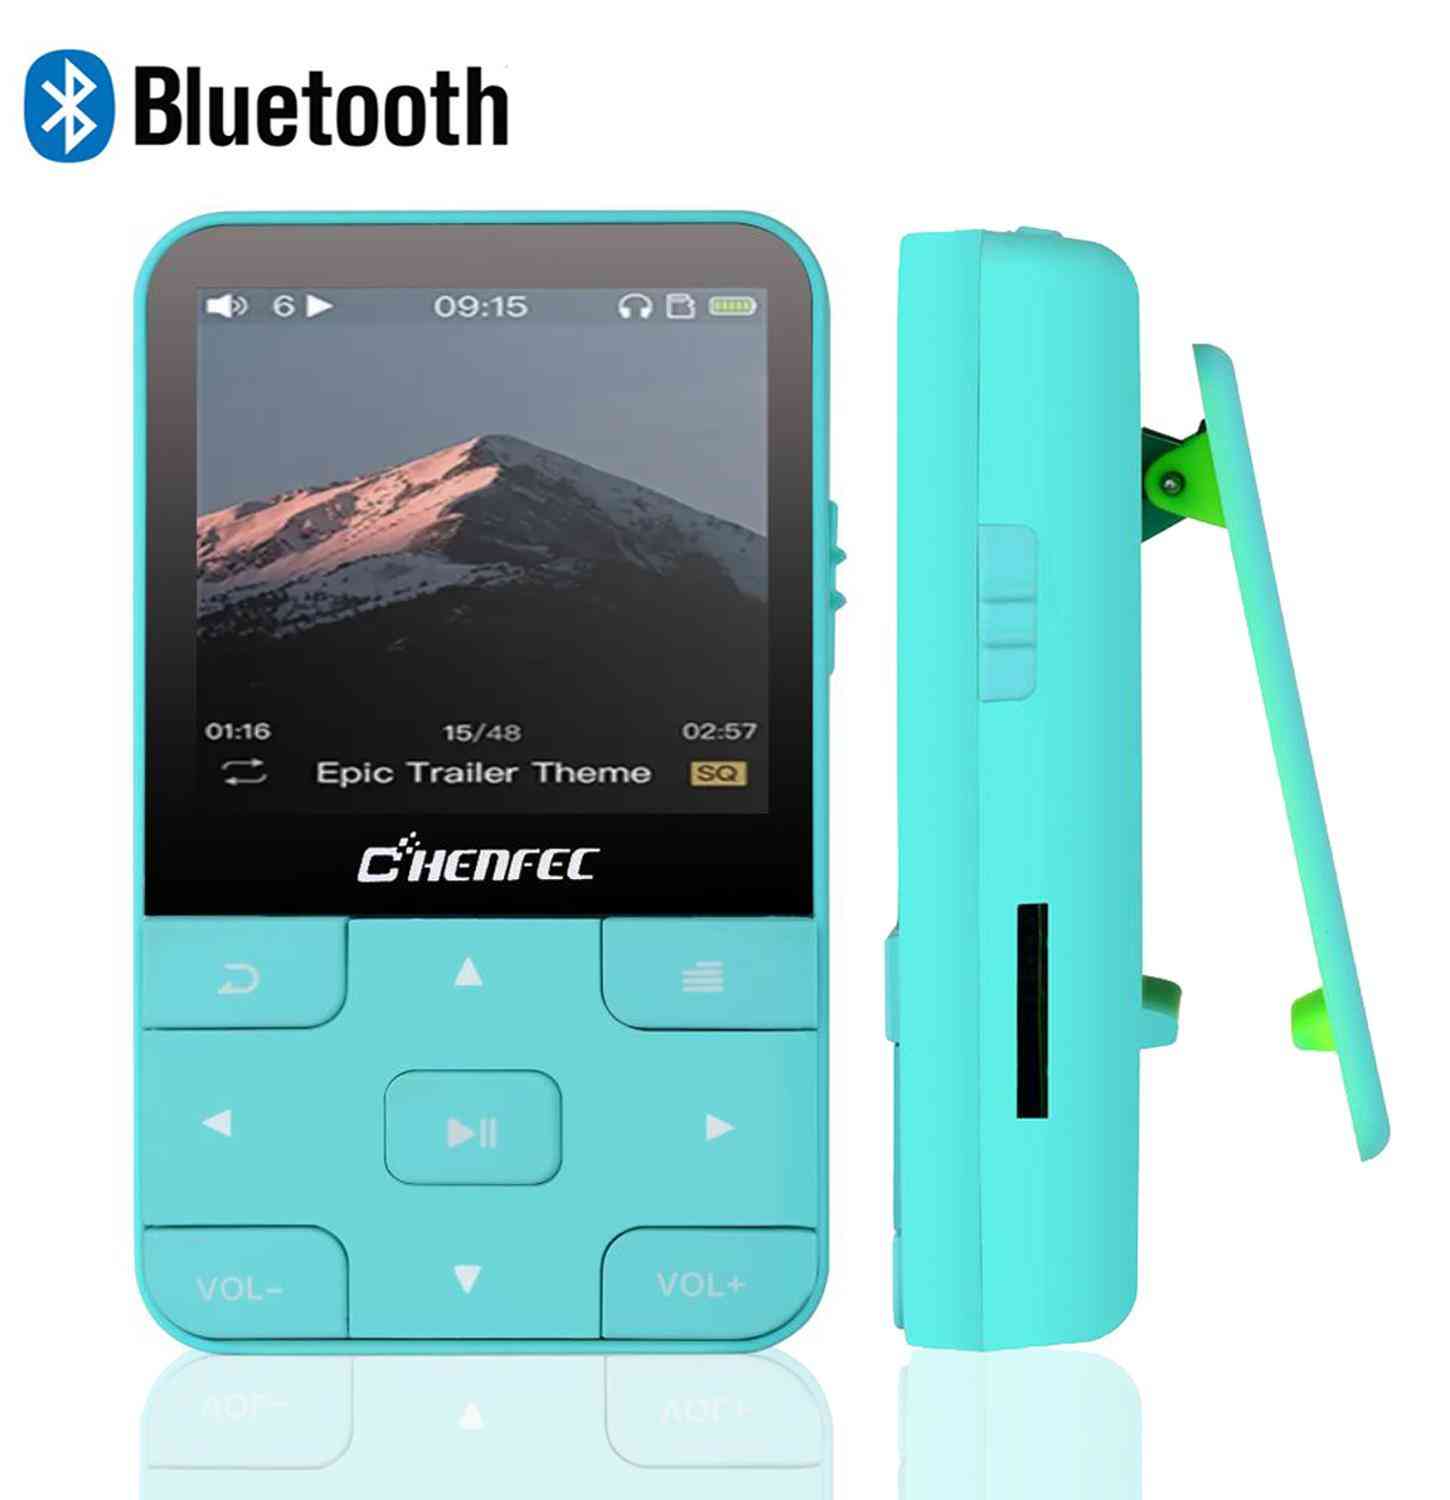 Ruizu Mp3 Player Bluetooth 4.0hifi Mini Clip Mp3 Music Player With Screen Support Fm,clock,pedometer Support Up To 128gb Sd Card